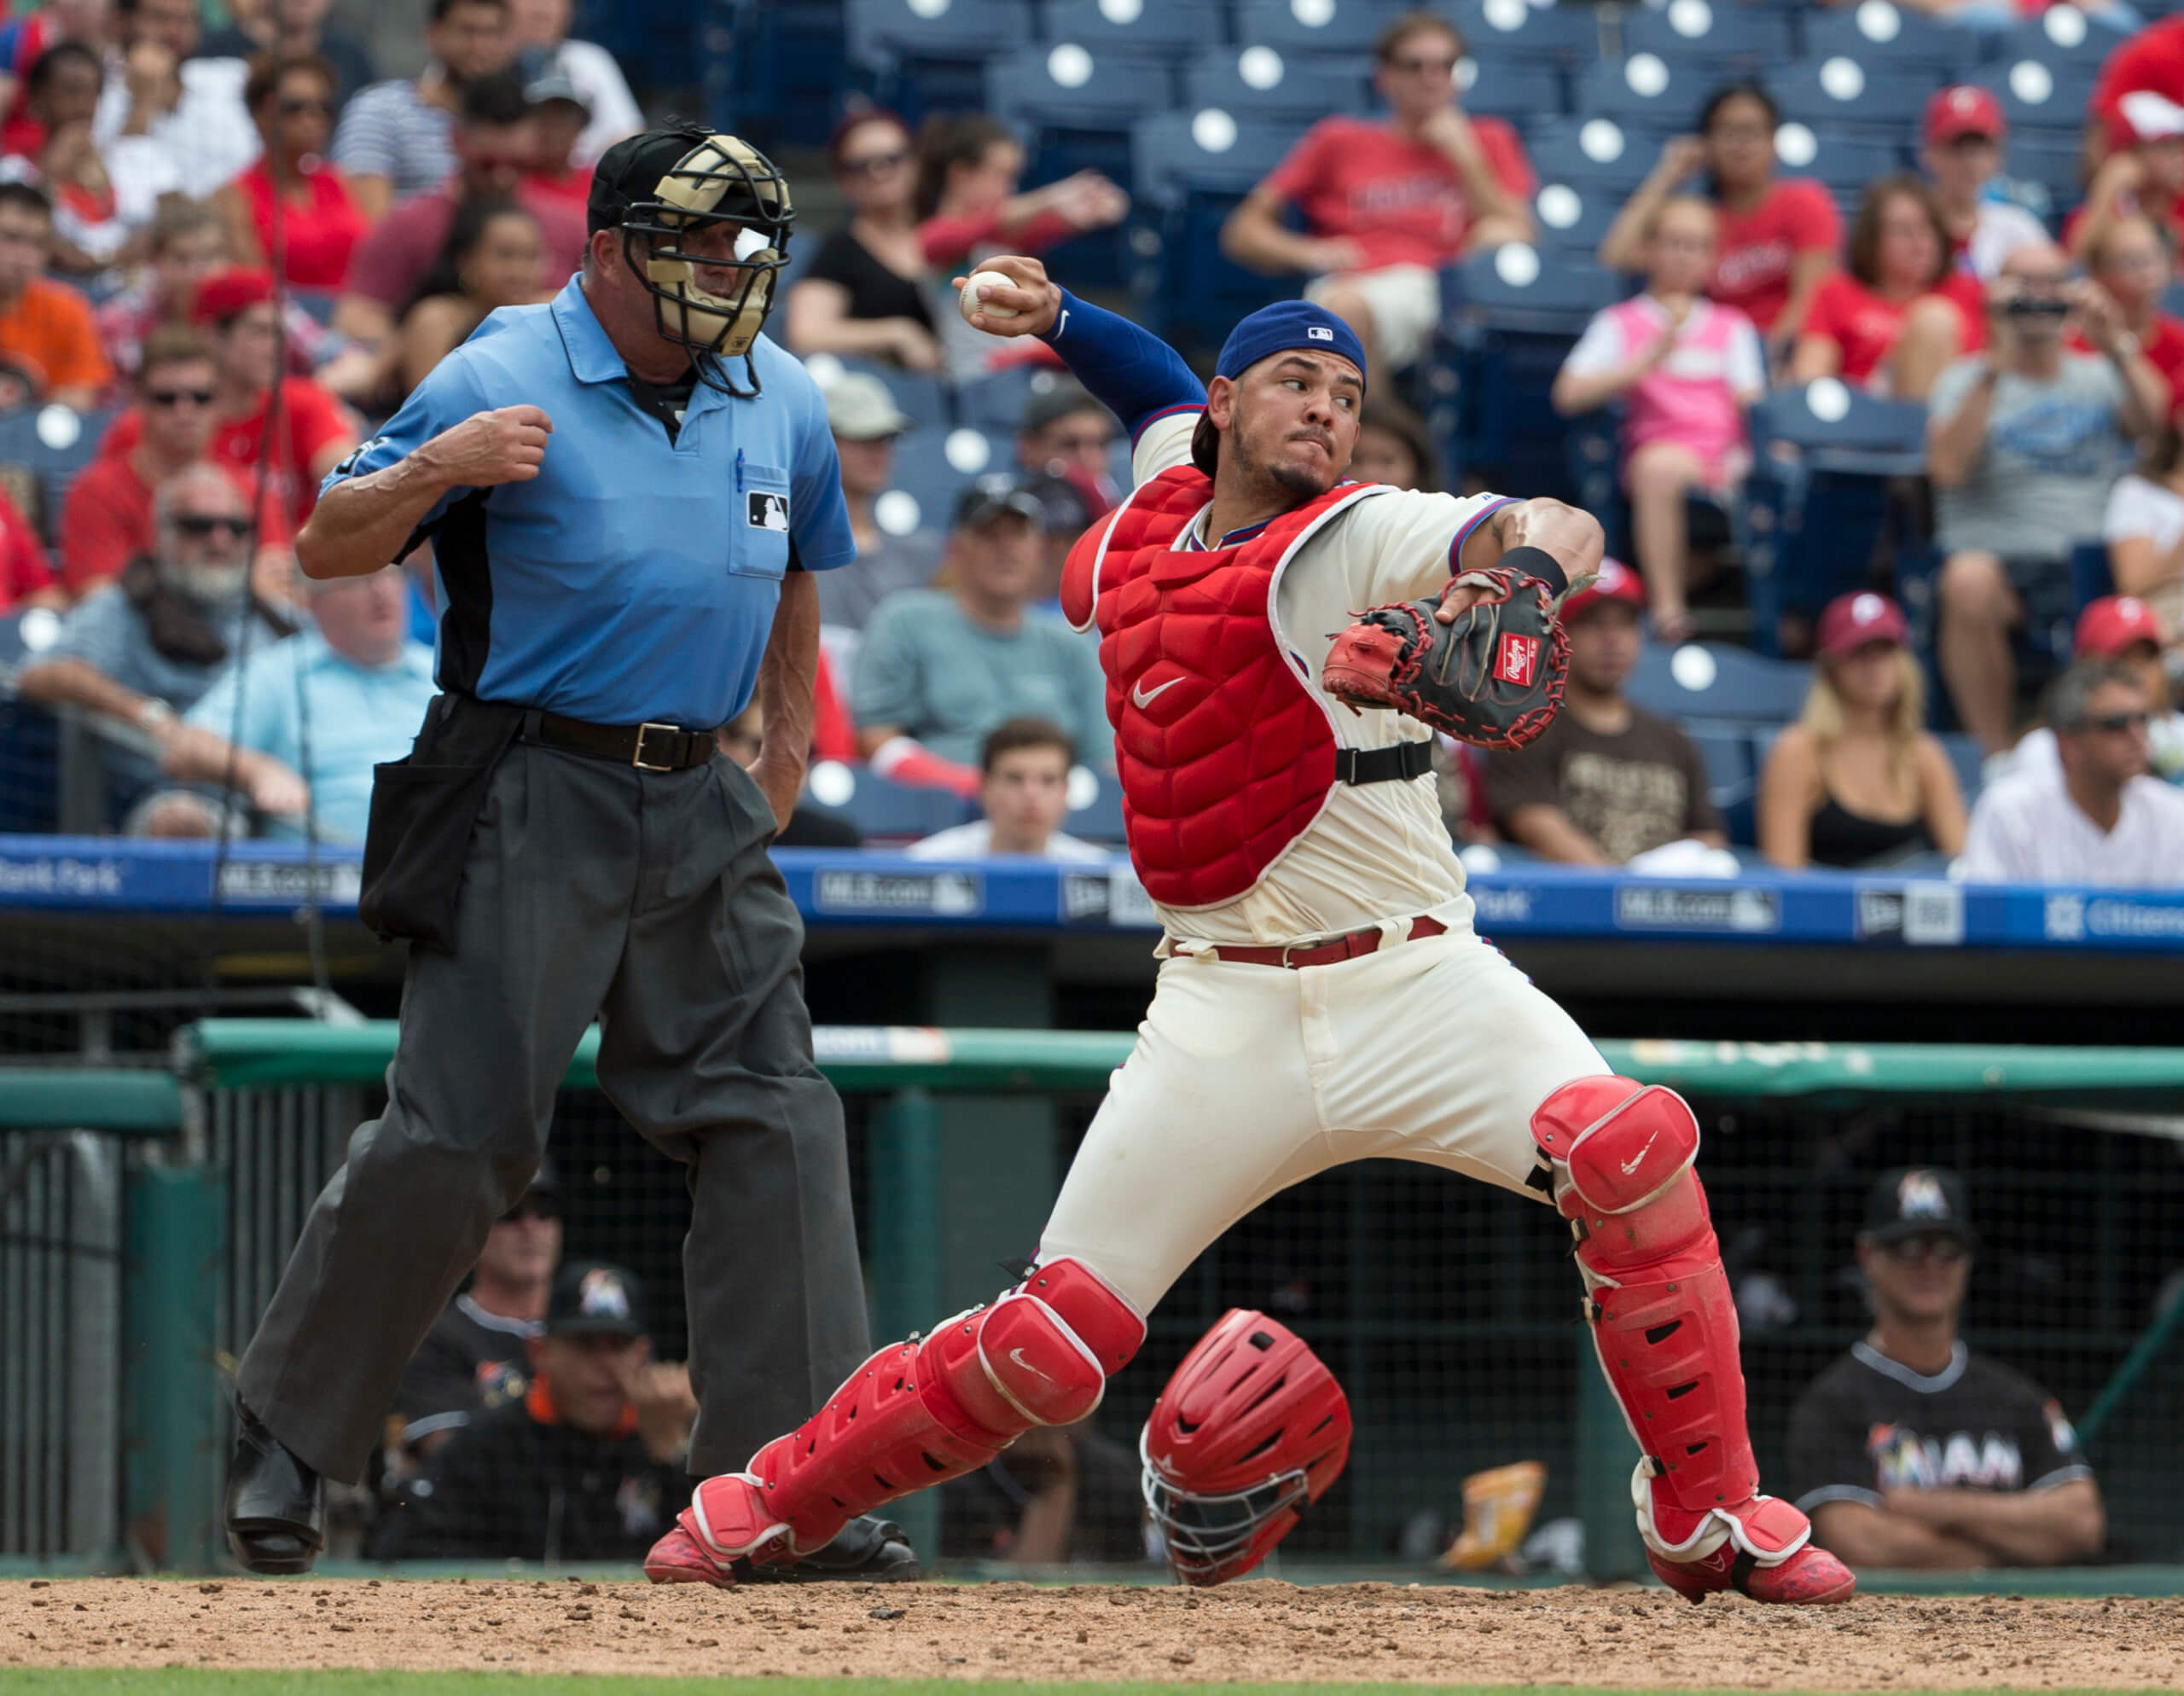 Jorge Alfaro starting to catch on at the big league level for Phillies